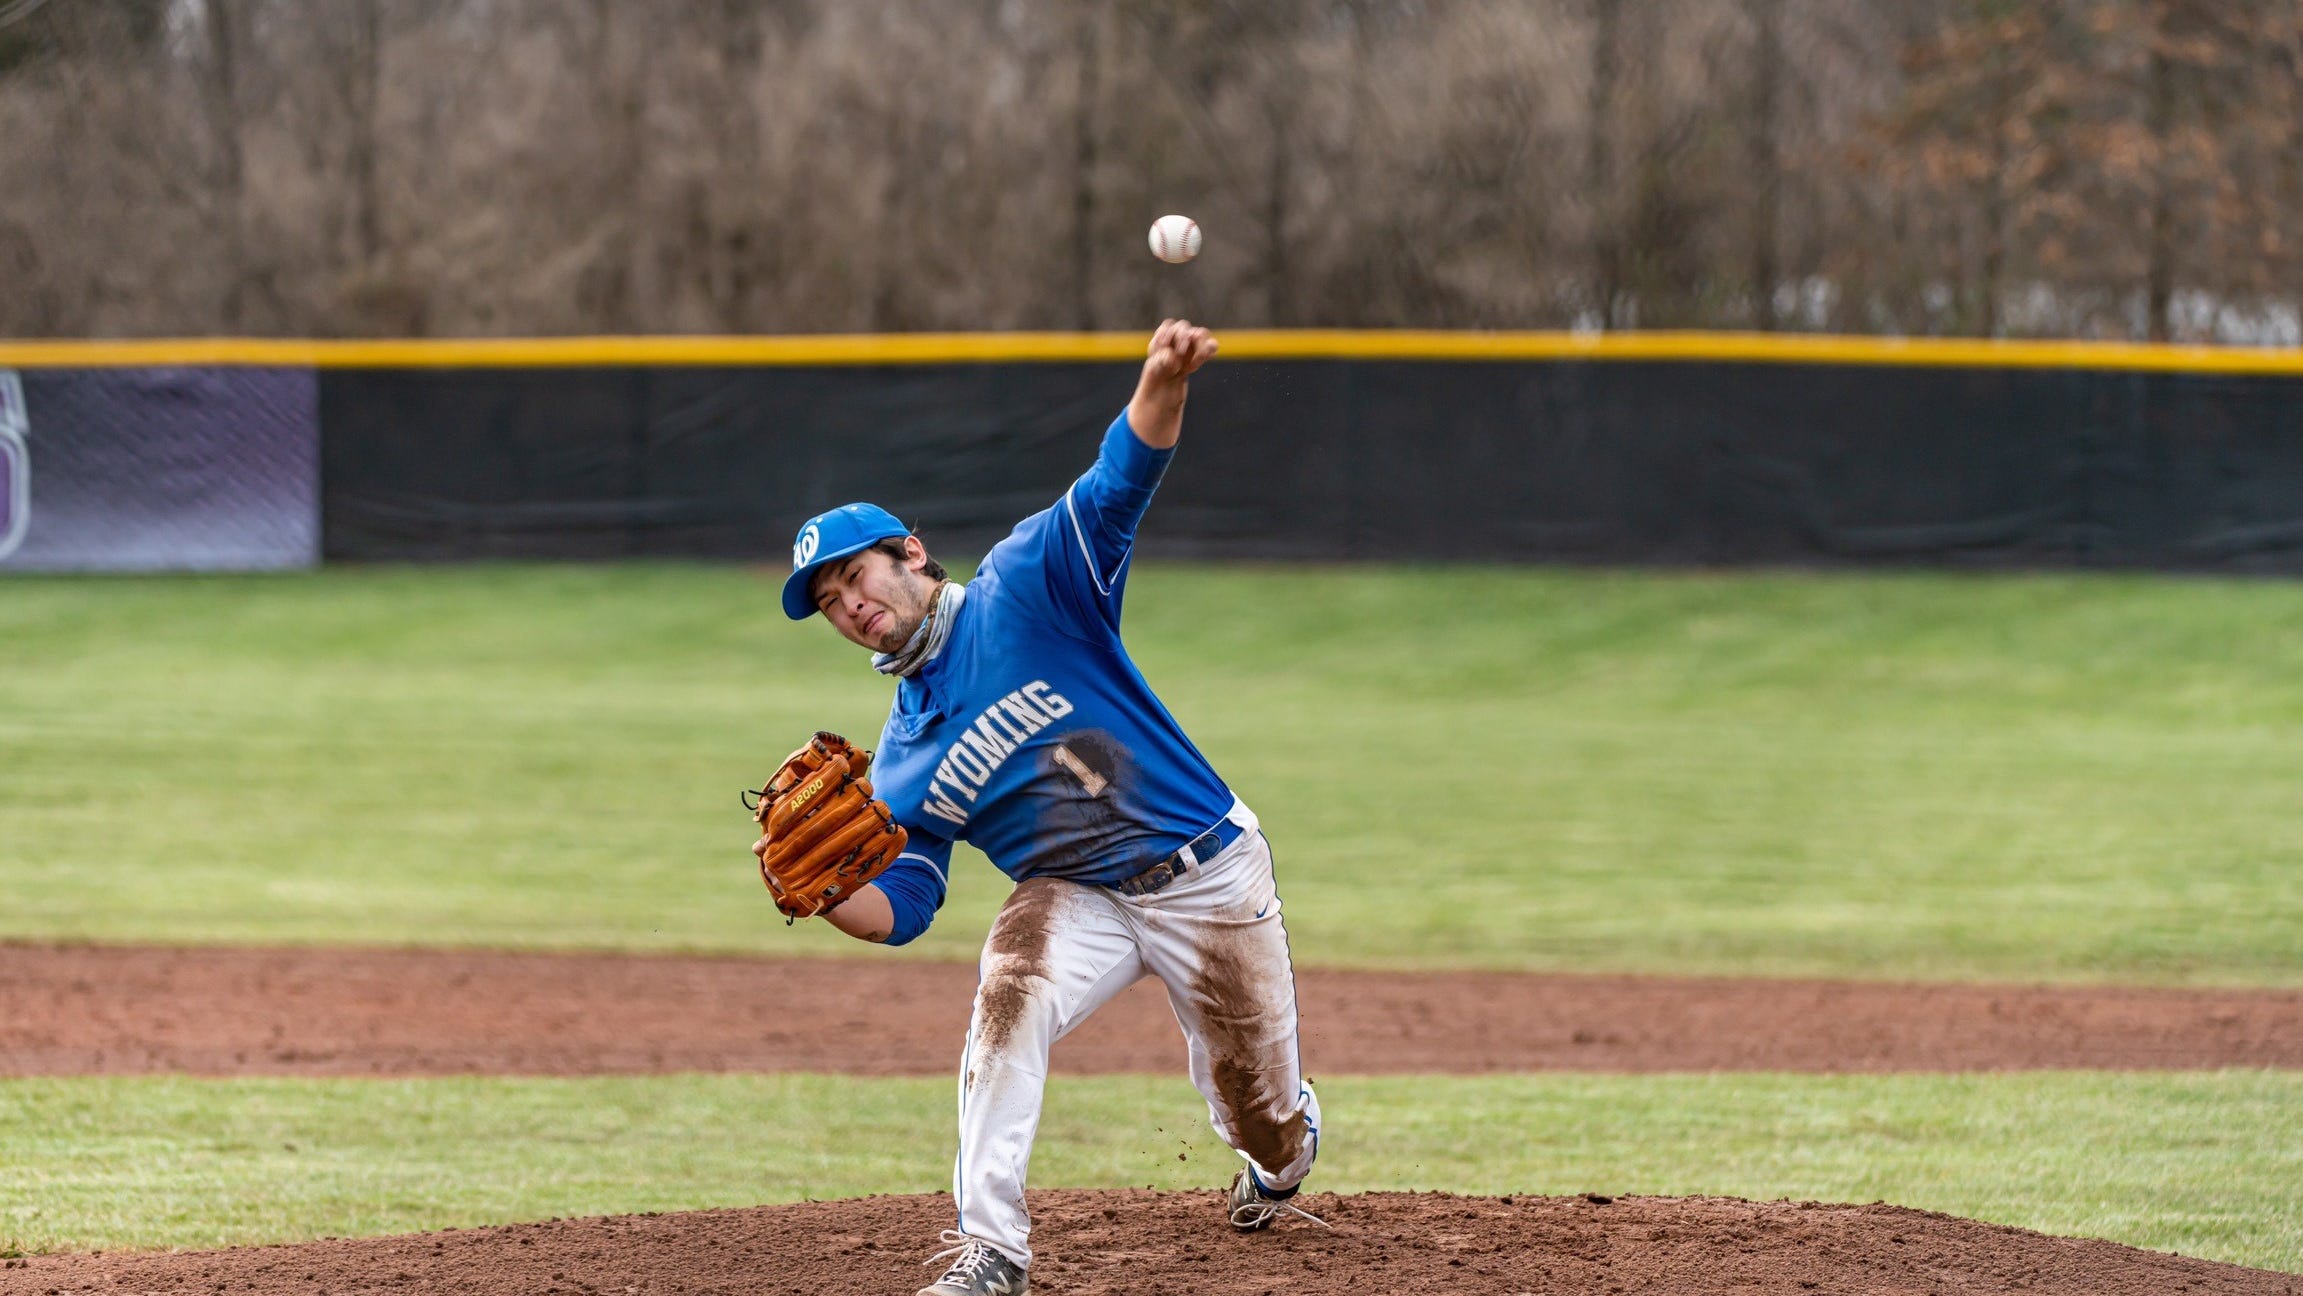 Wyoming baseball gets a nohitter; Summit hurler throws perfect game